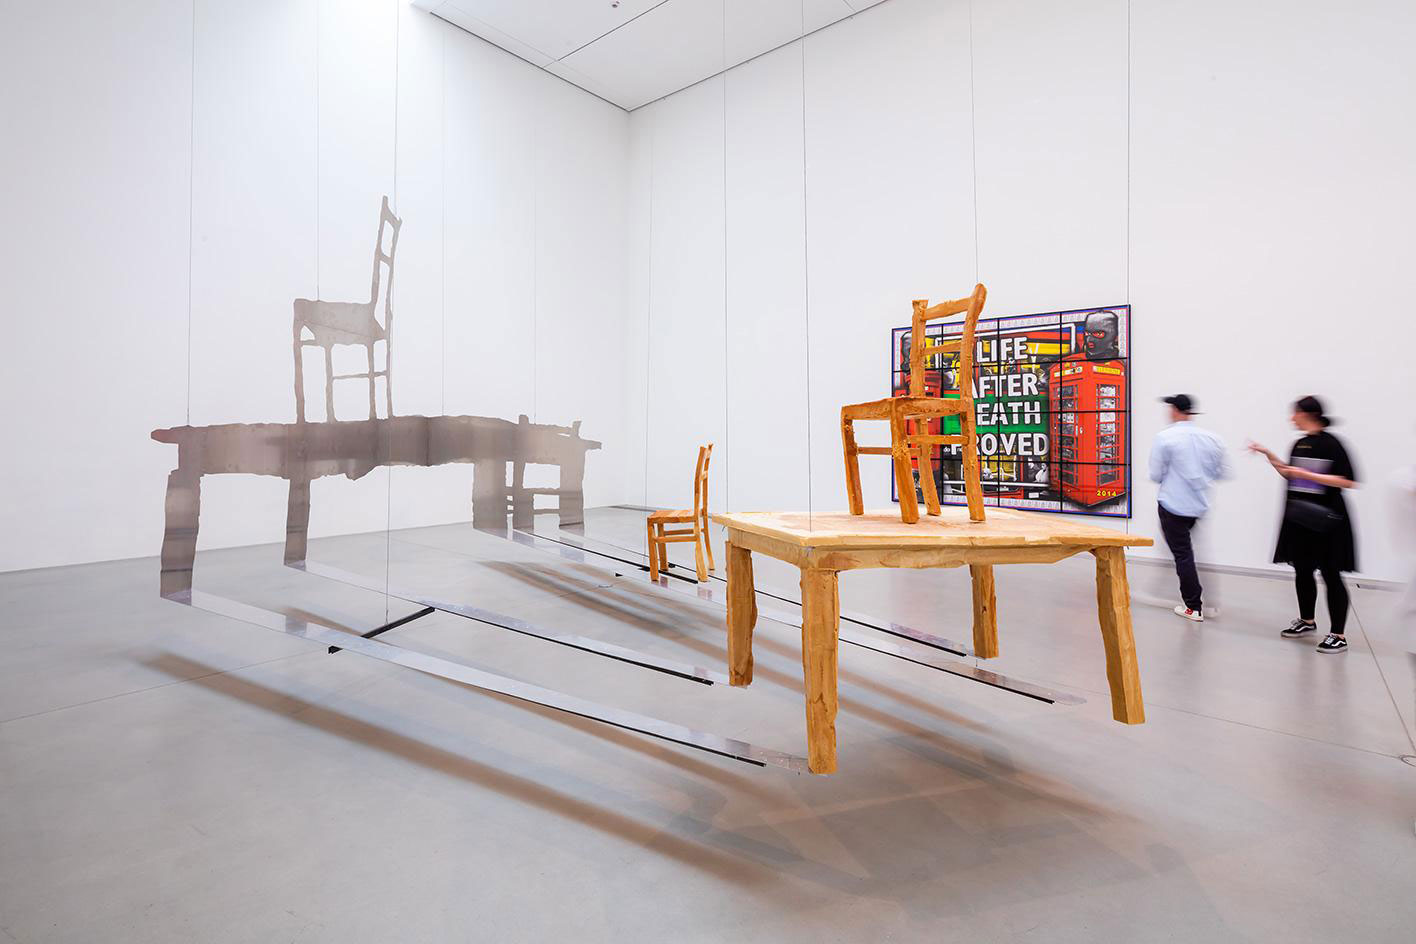 Installation view with works by Urs Fischer and Gilbert&George. Photo: Bettina Diel